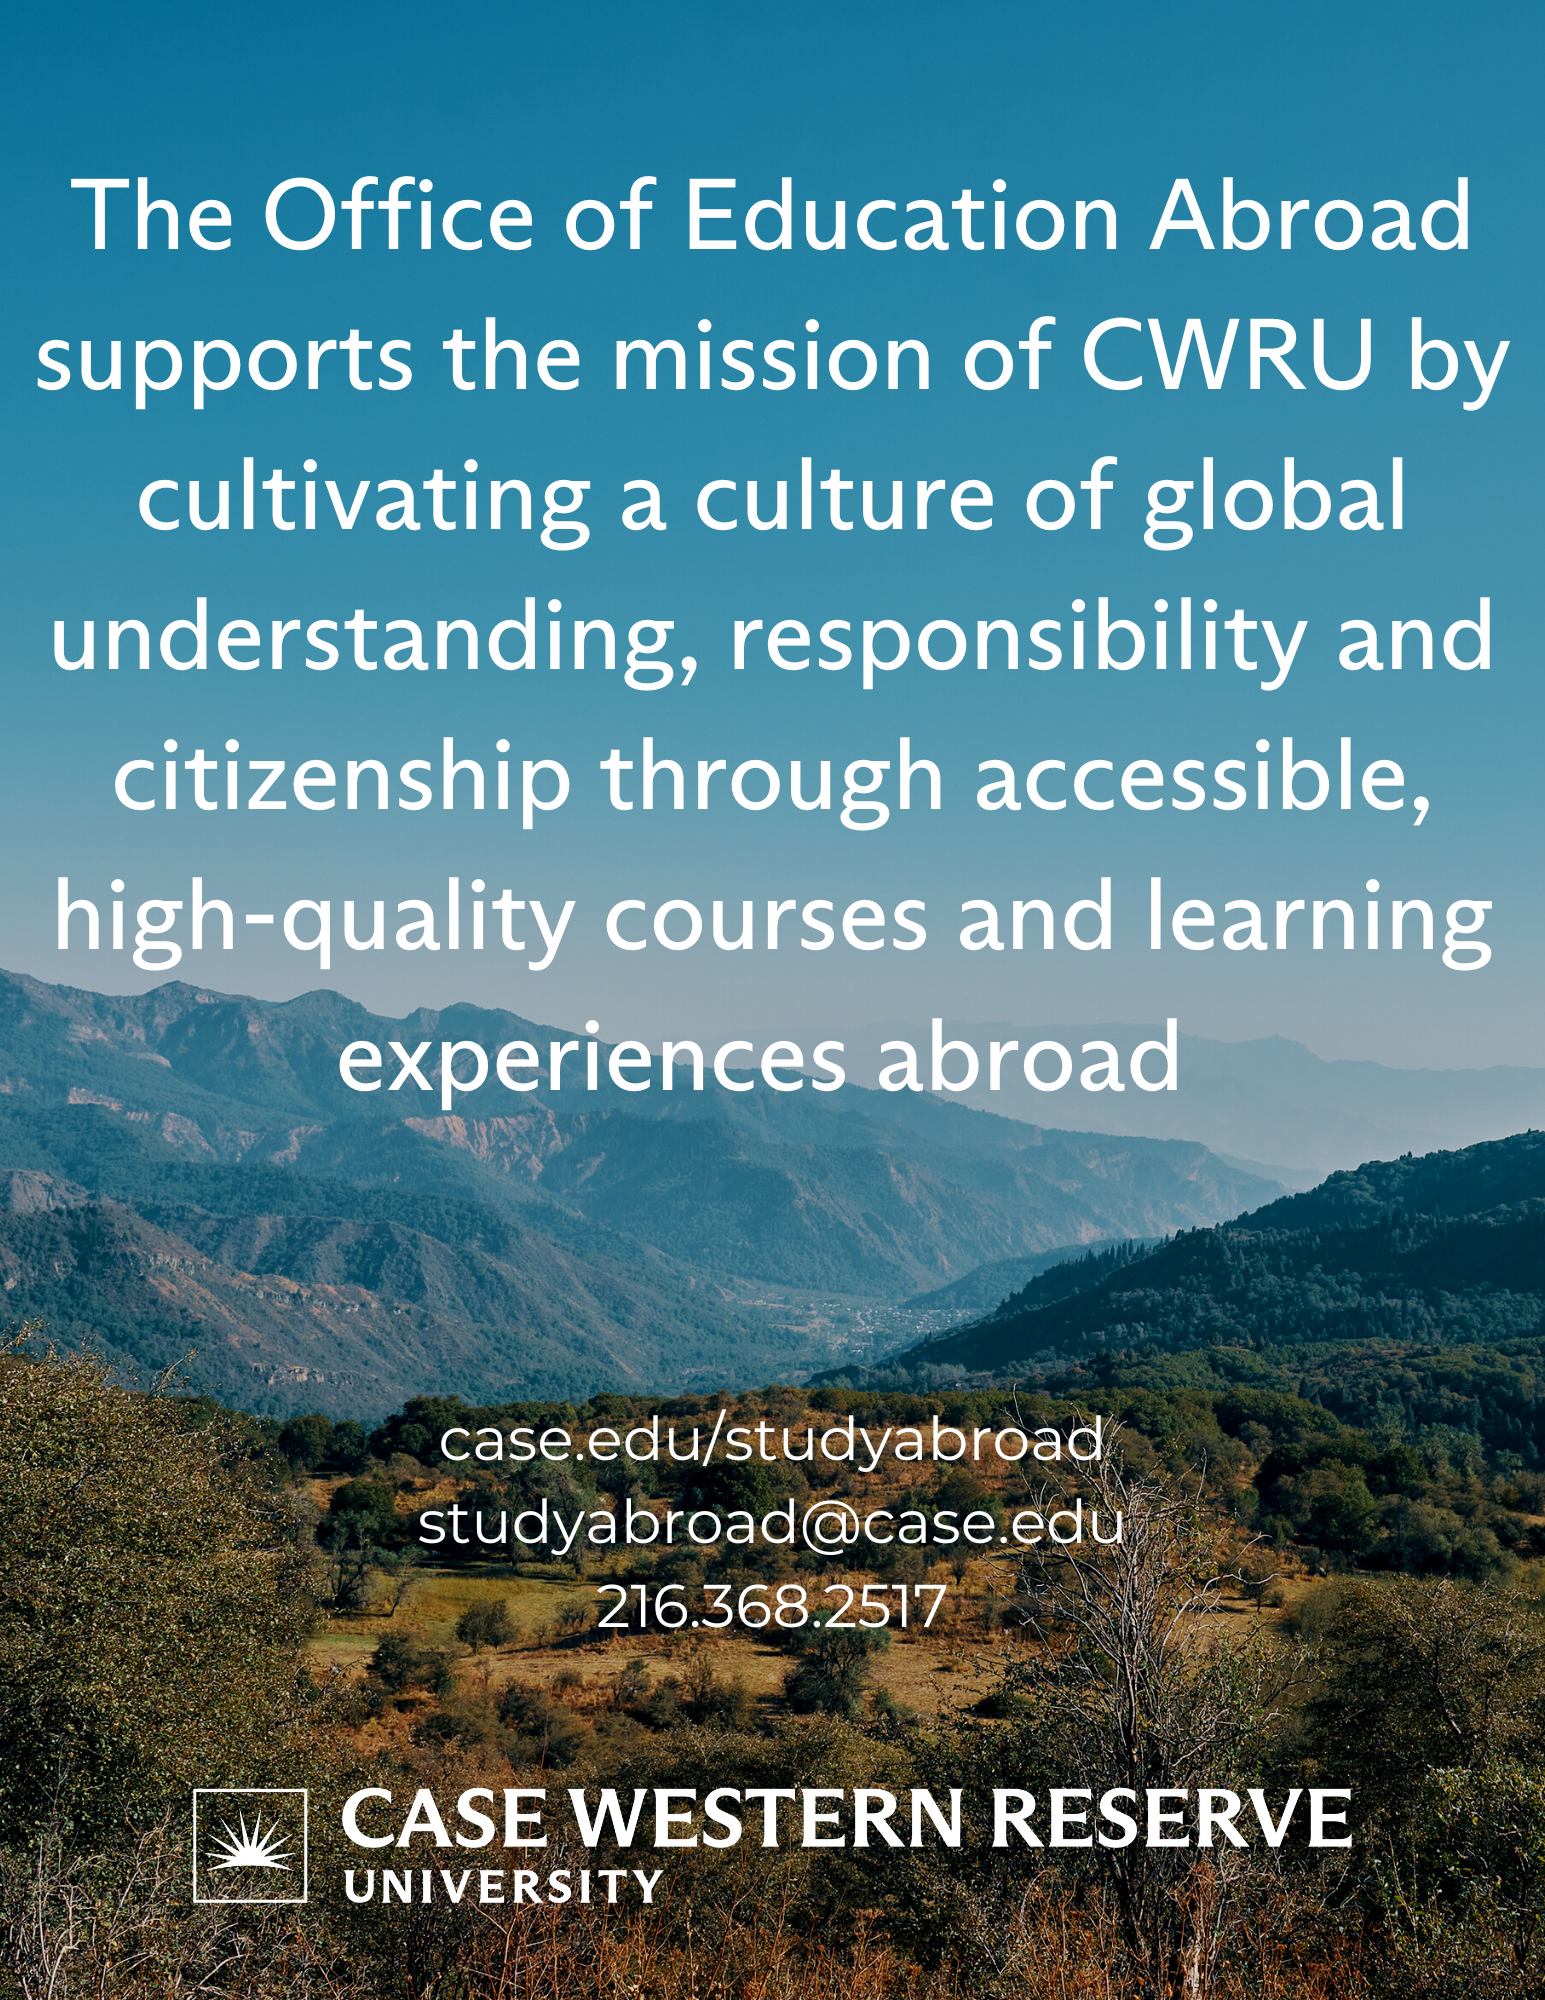 The Office of Education Abroad supports the mission of CWRU by cultivating a culture of global understanding, responsibility, and citizenship through accessible, high-quality courses and learning experiences abroad